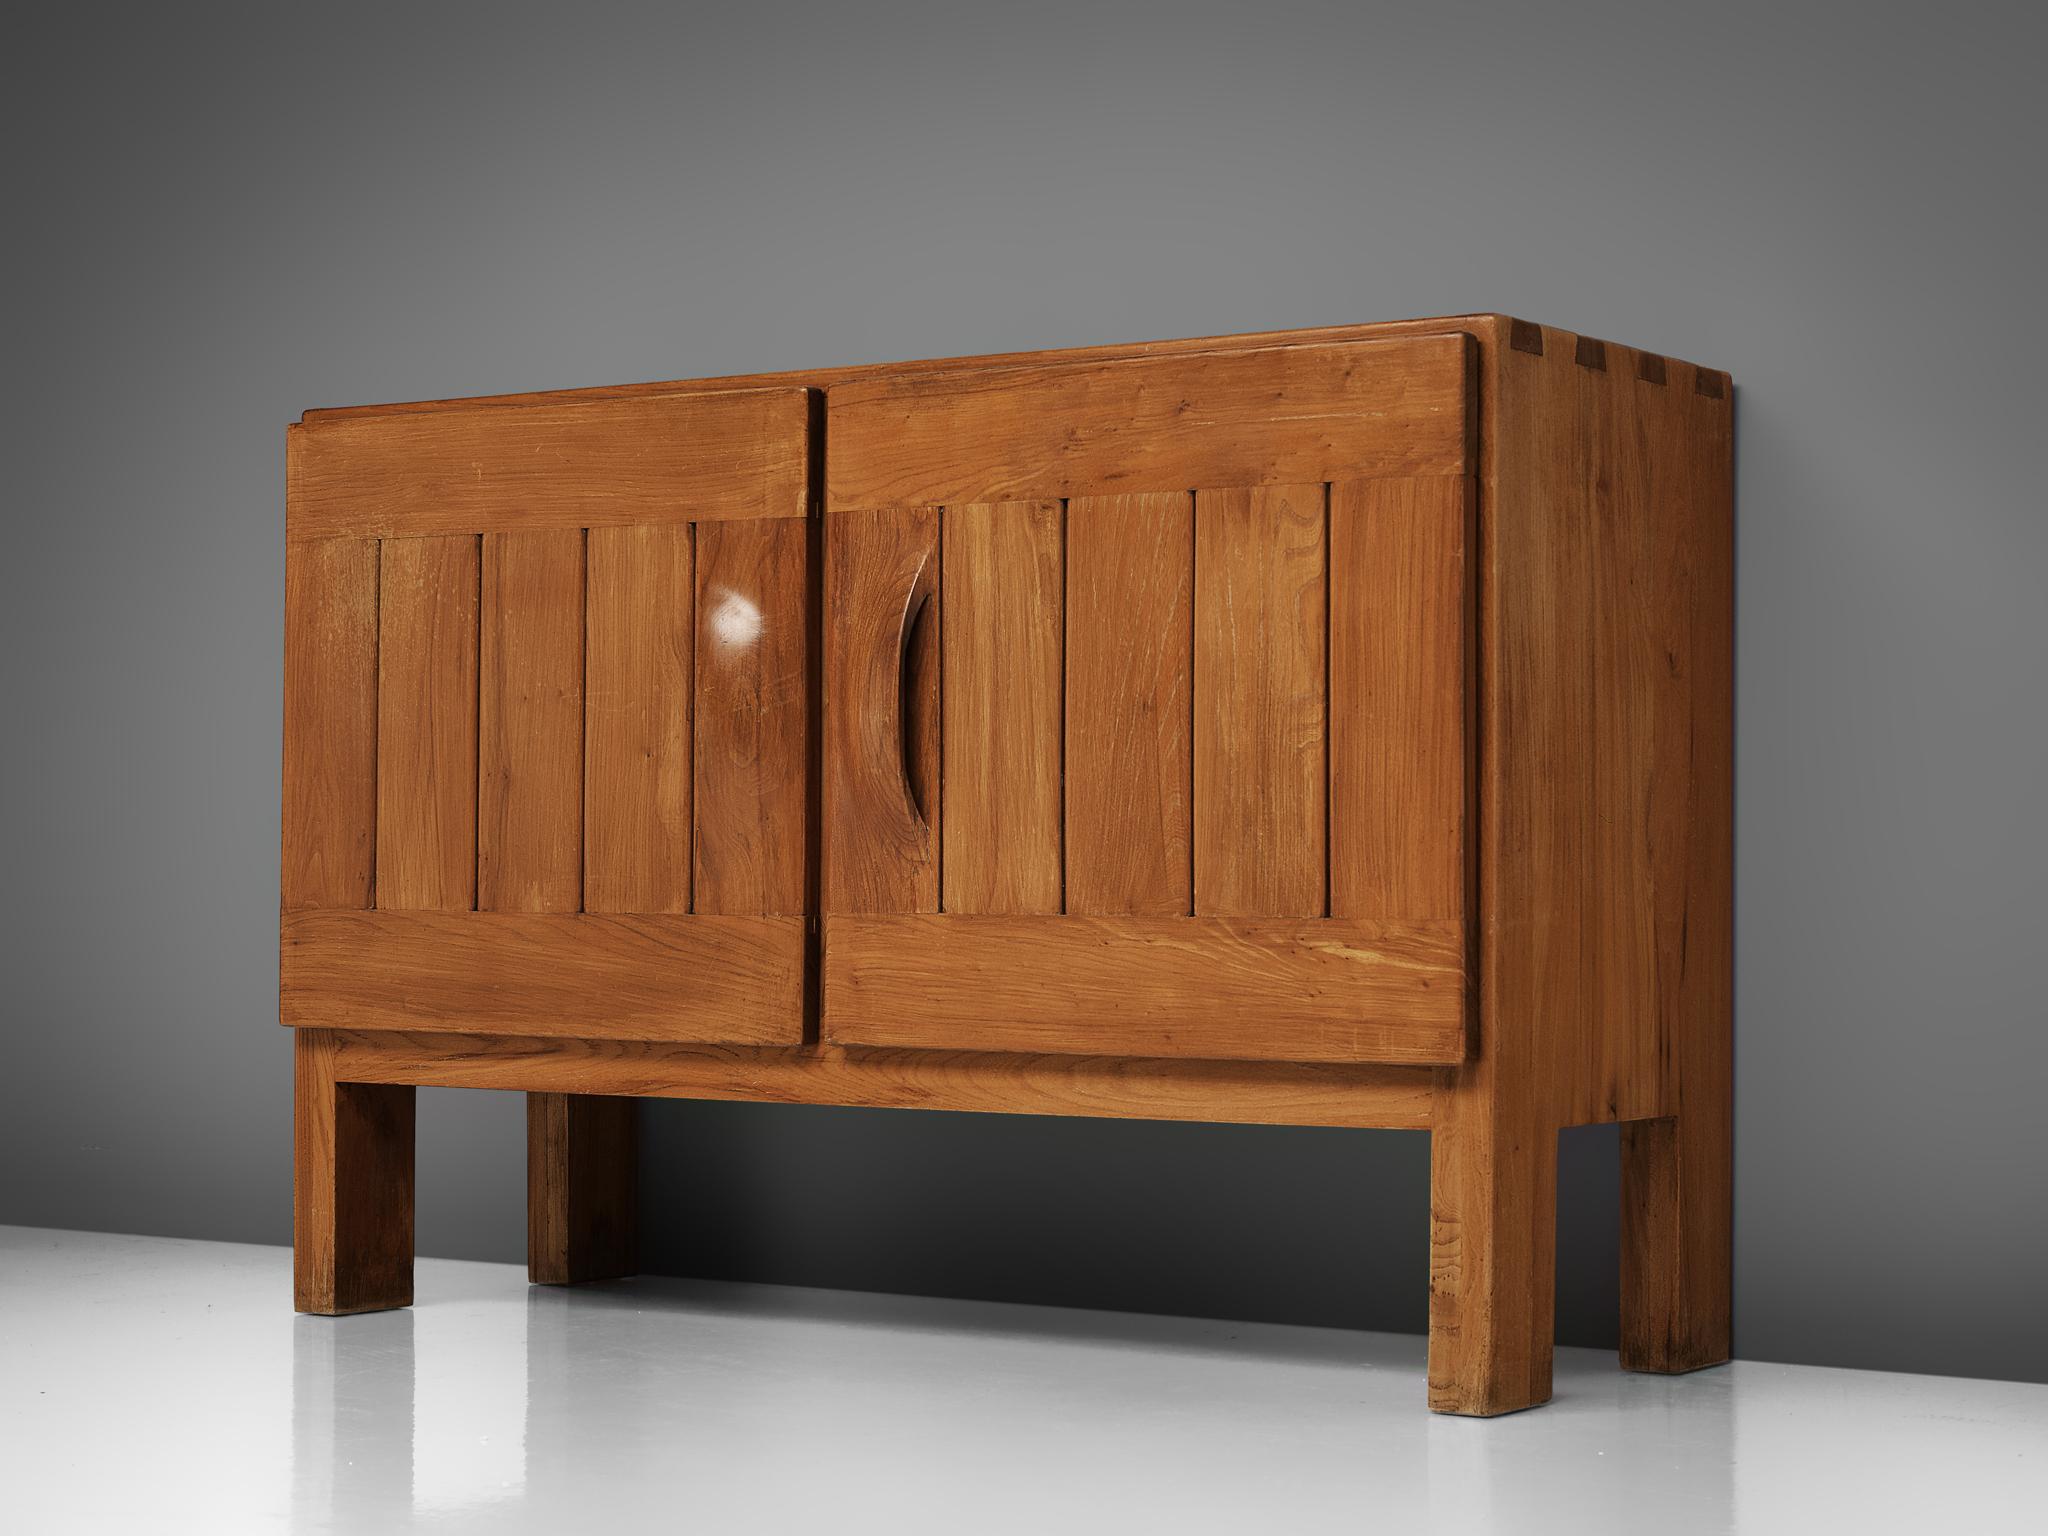 Maison Regain, credenza, elm, France, 1970s.

This exquisite credenza combines a simplified yet complex design combined with nifty, solid construction details that characterize Maison Regain's designs. The two well balanced, sturdy doors are